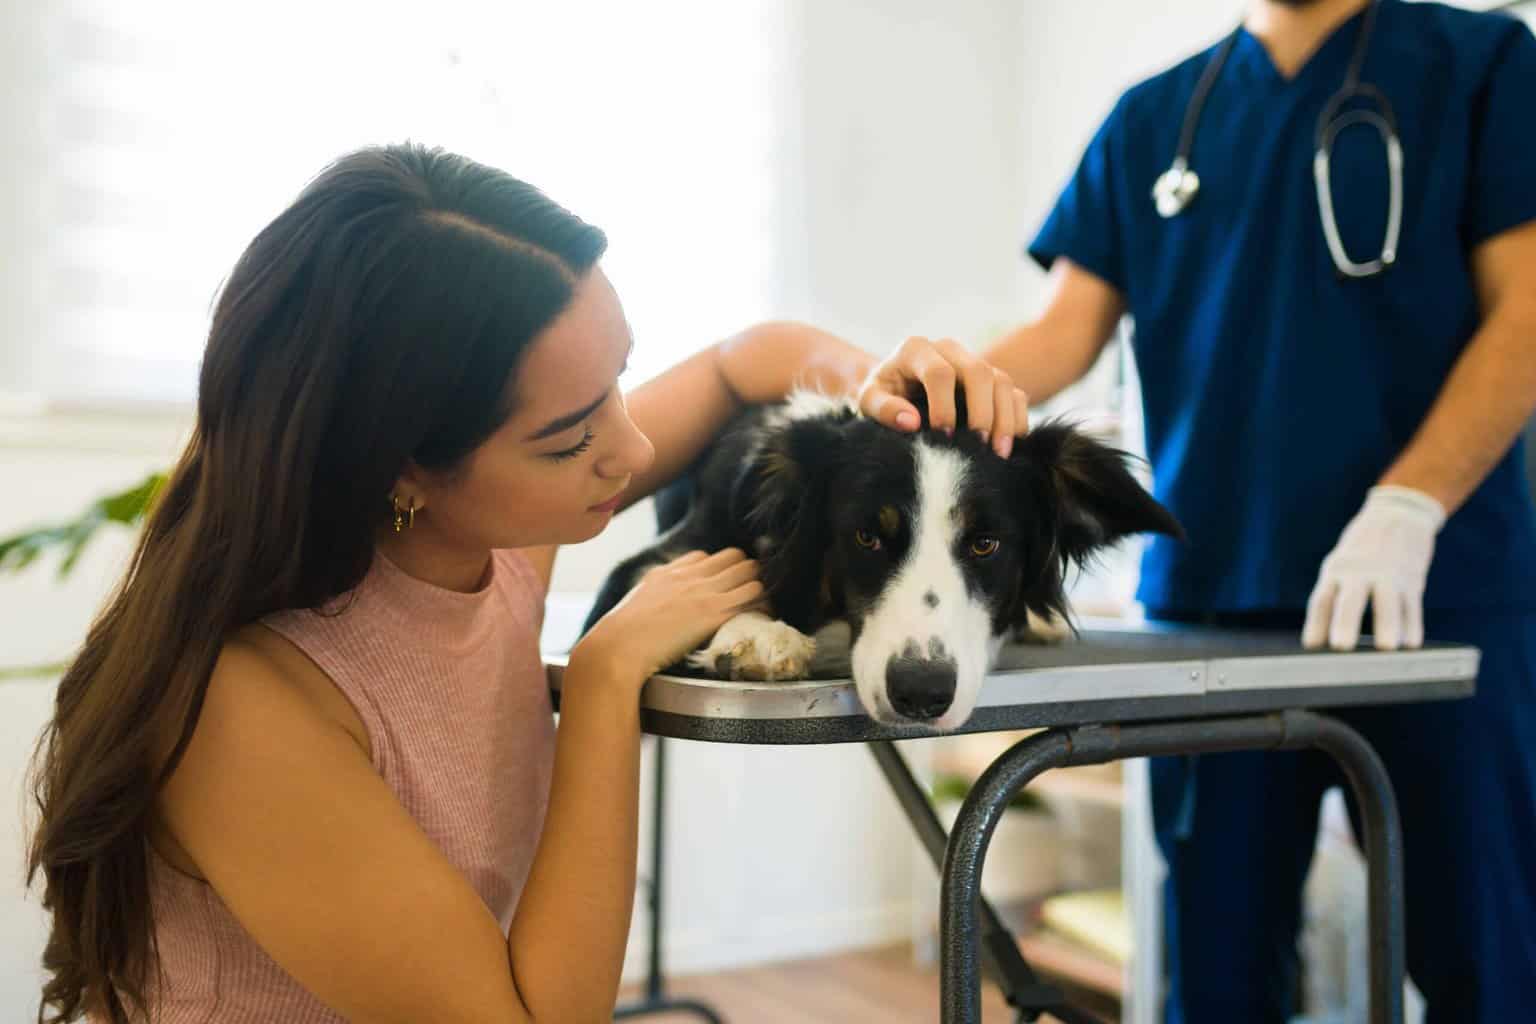 Woman comforts border collie during exam. One of the best ways to hire the right vet is to make an appointment to meet them. This allows you to meet staff and ask questions.